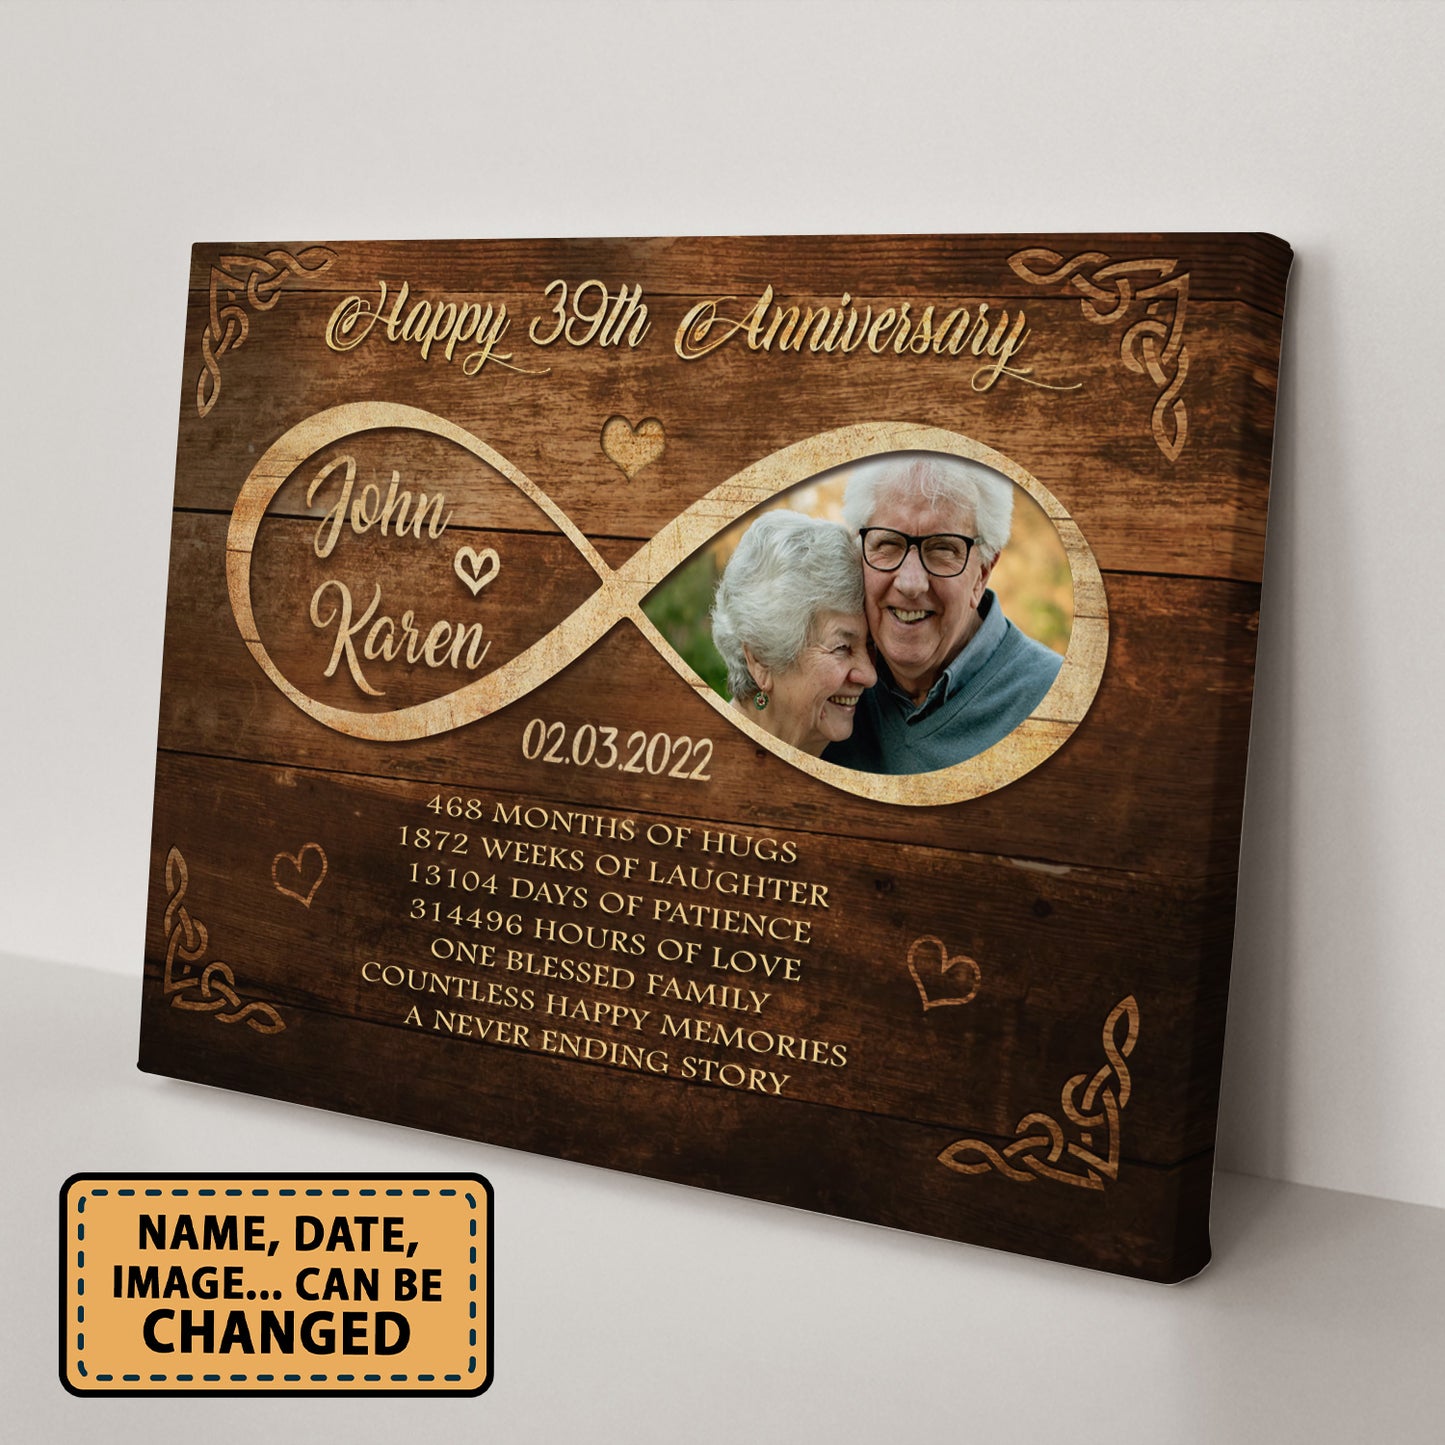 Happy 39th Anniversary Old Television Anniversary Canvas Valentine Gifts